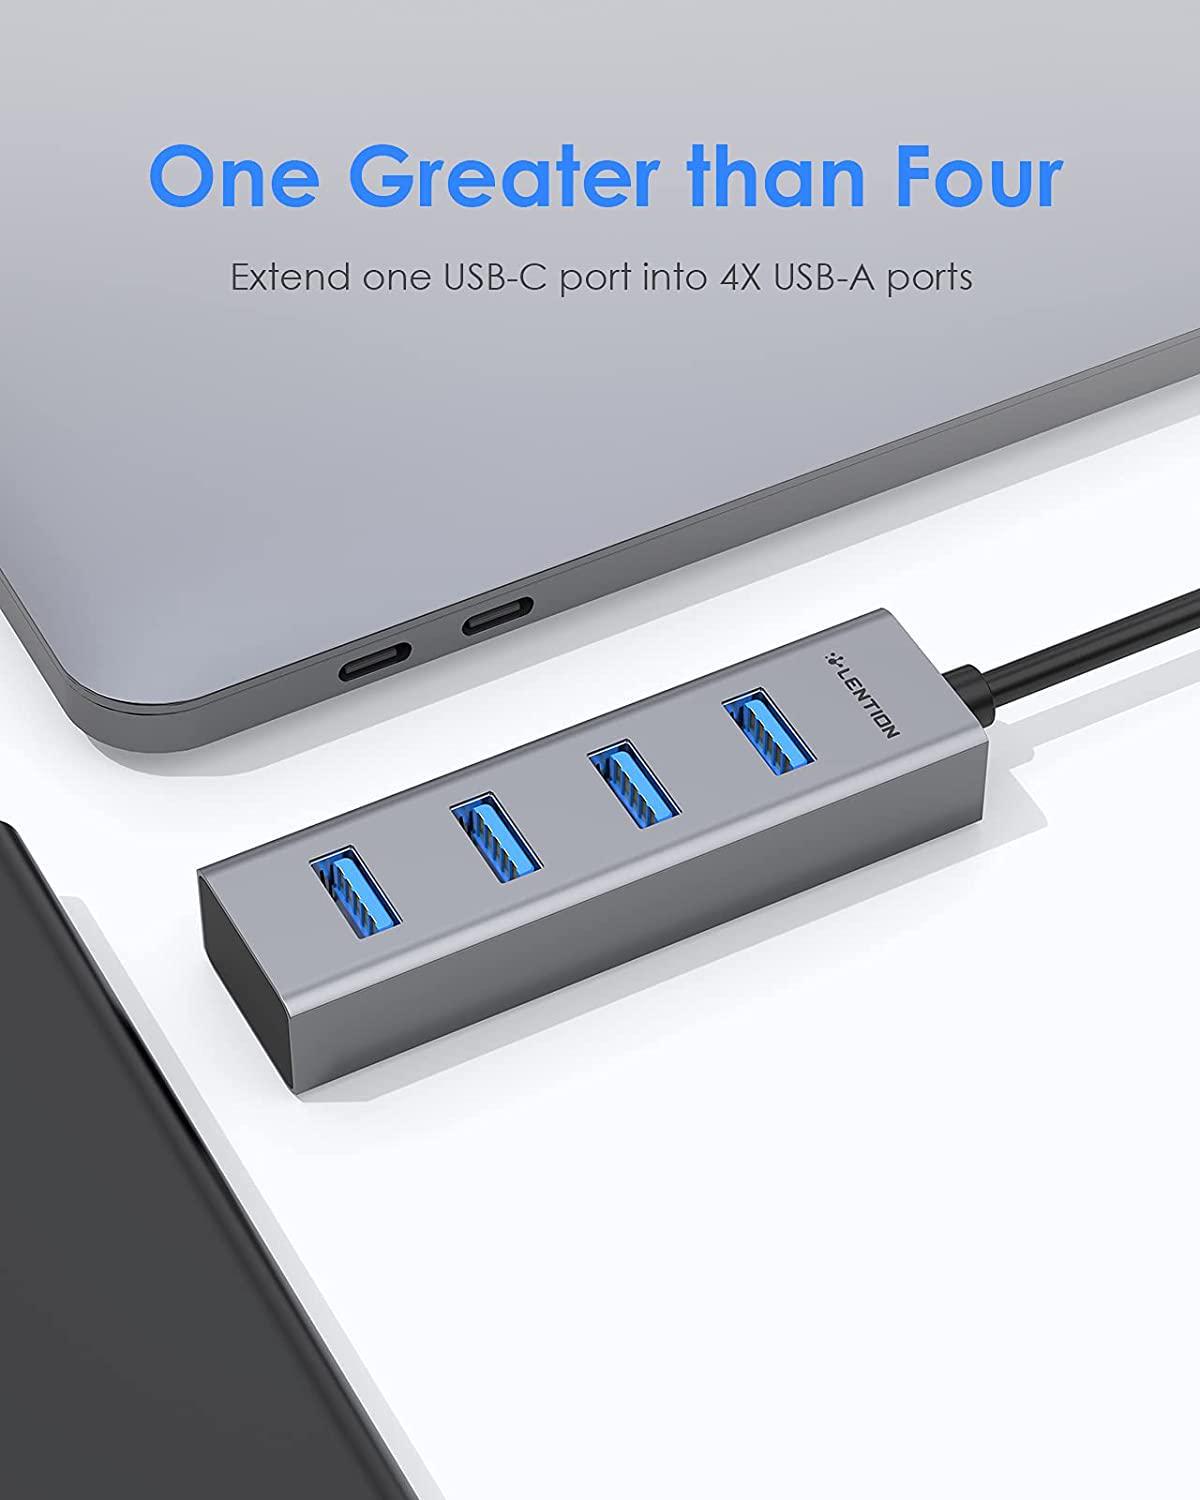 LENTION, LENTION 4-in-1 USB C Hub, 4 USB 3.0 Ports, USB C to USB A Multiport Adapter for 2022-2016 MacBook Pro, Mac Air and Surface, iPad Pro, Chromebook, More, Stable Driver Certified (CB-C22s, Space Gray)